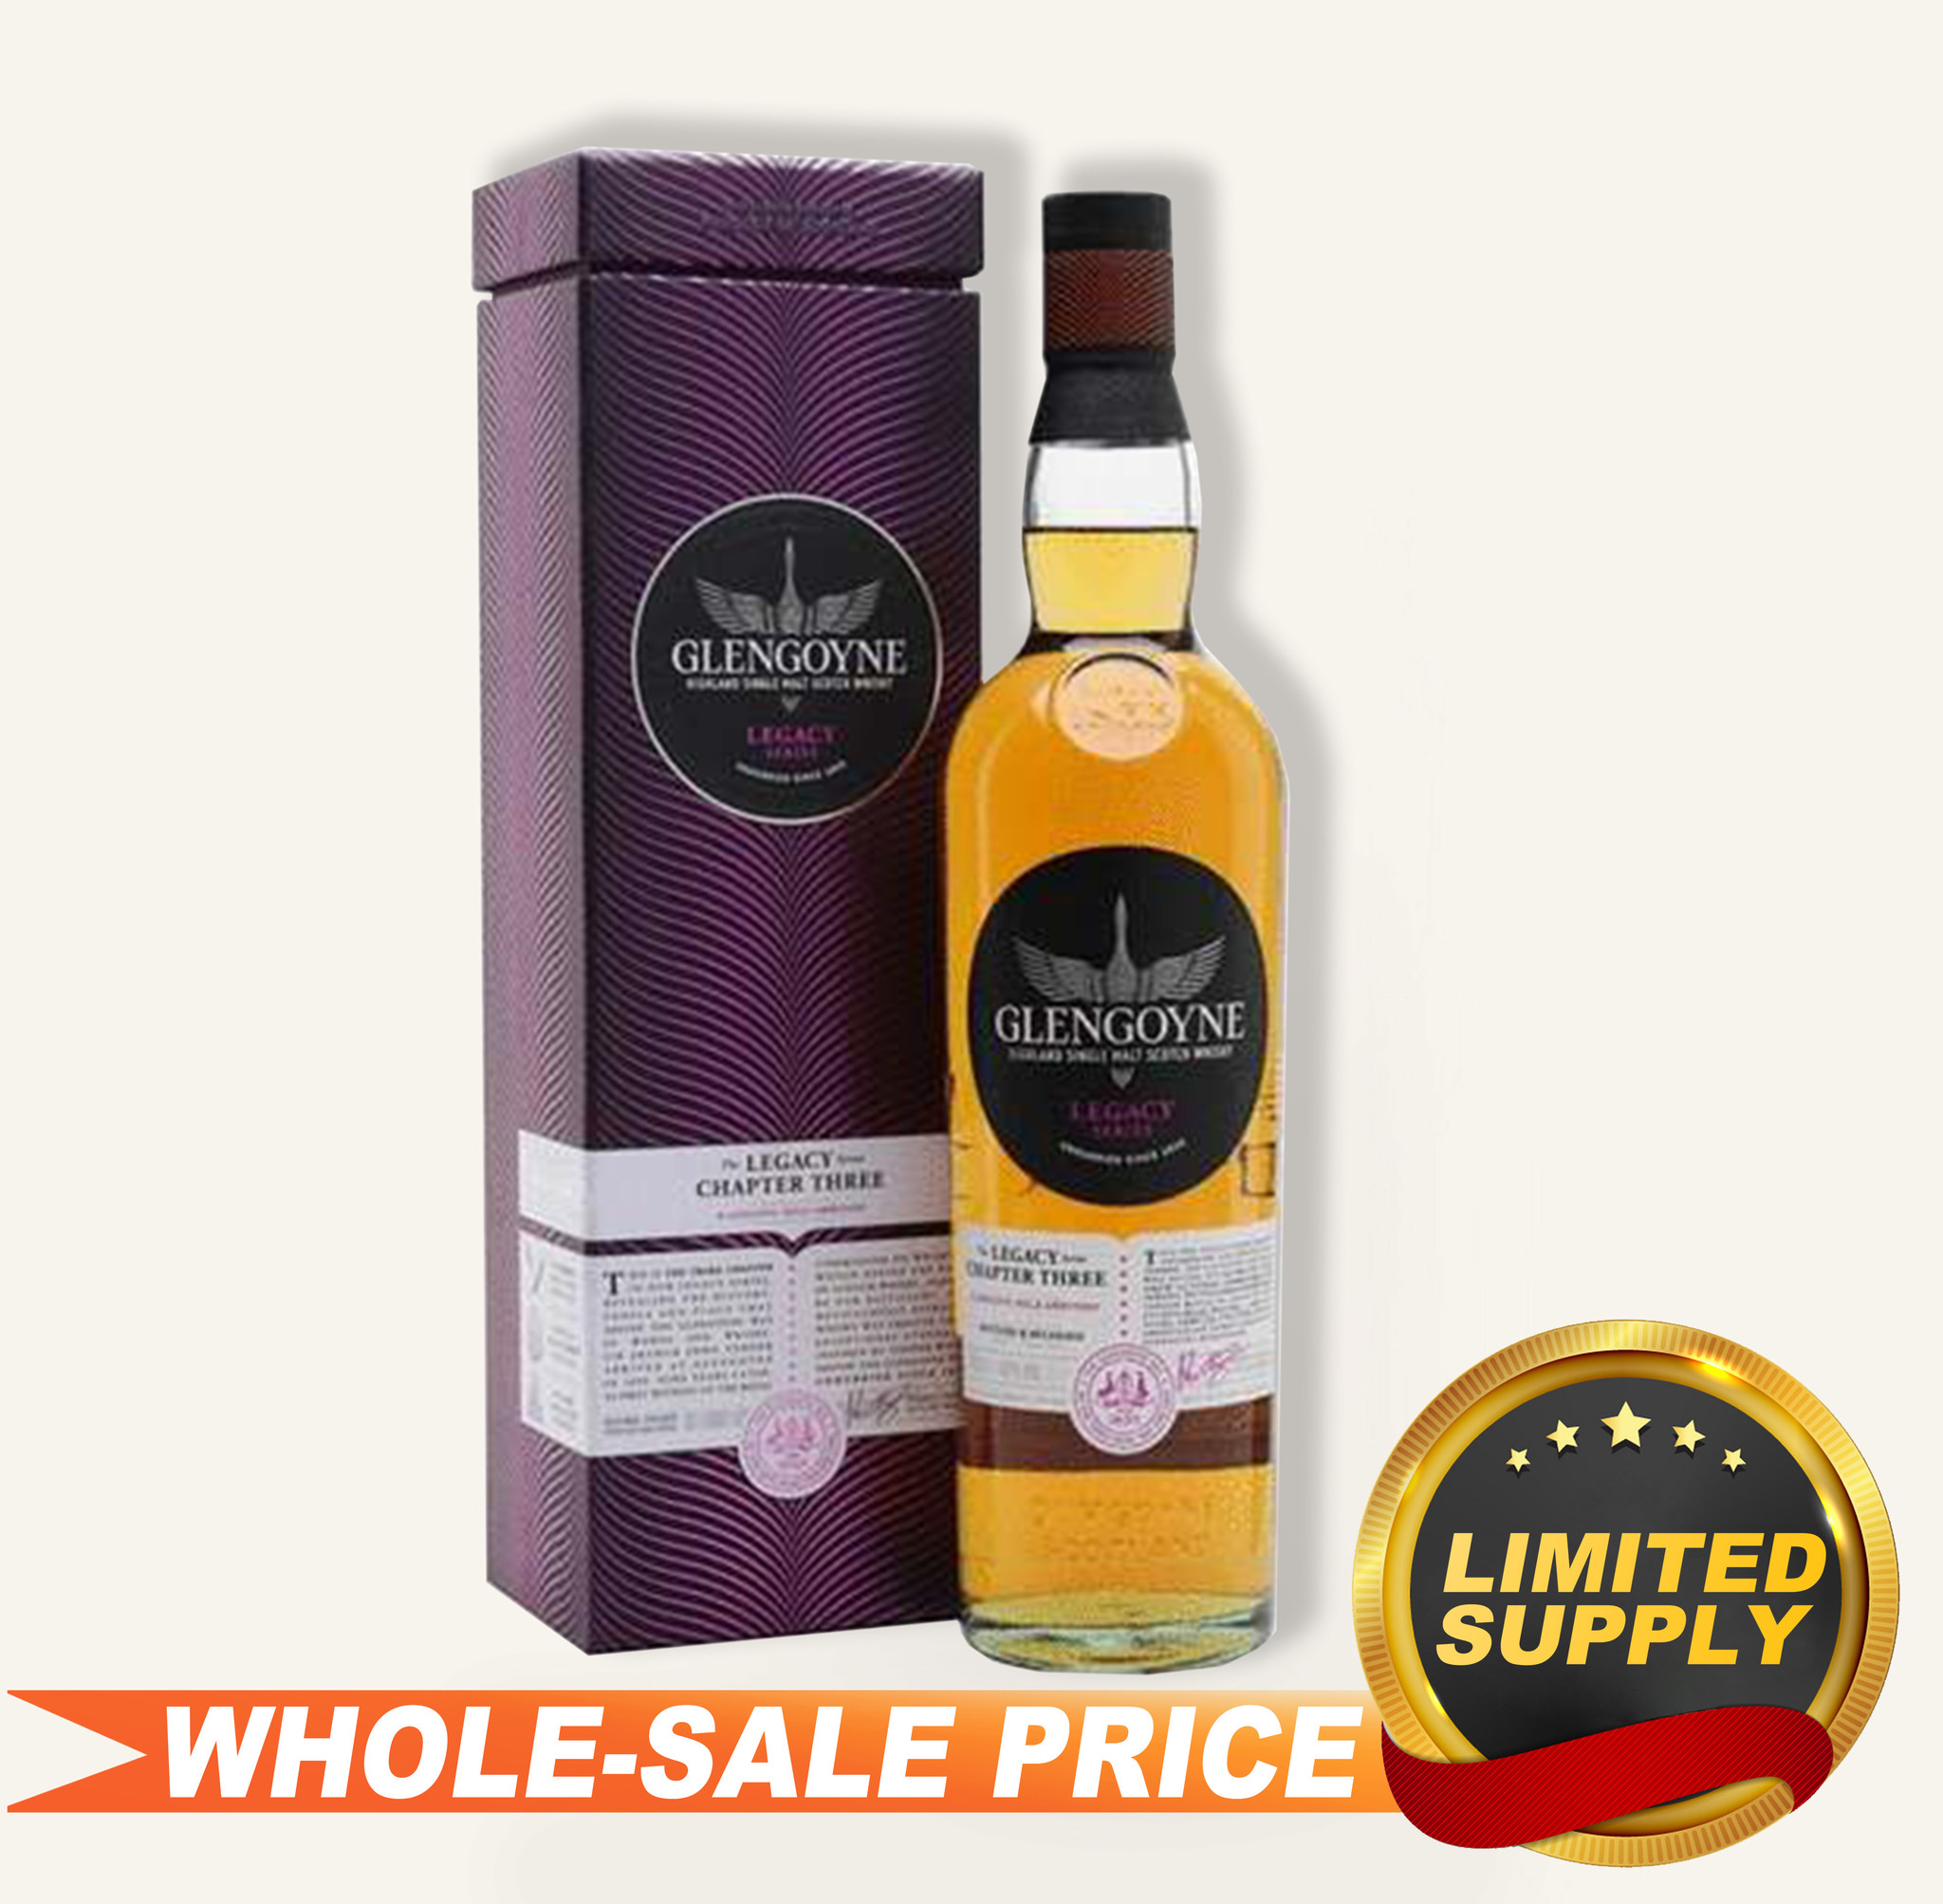 Arran Sherry Cask Single Malt Scotch Whisky 750ml Free Delivery - Uncle  Fossil Wine&Spirits